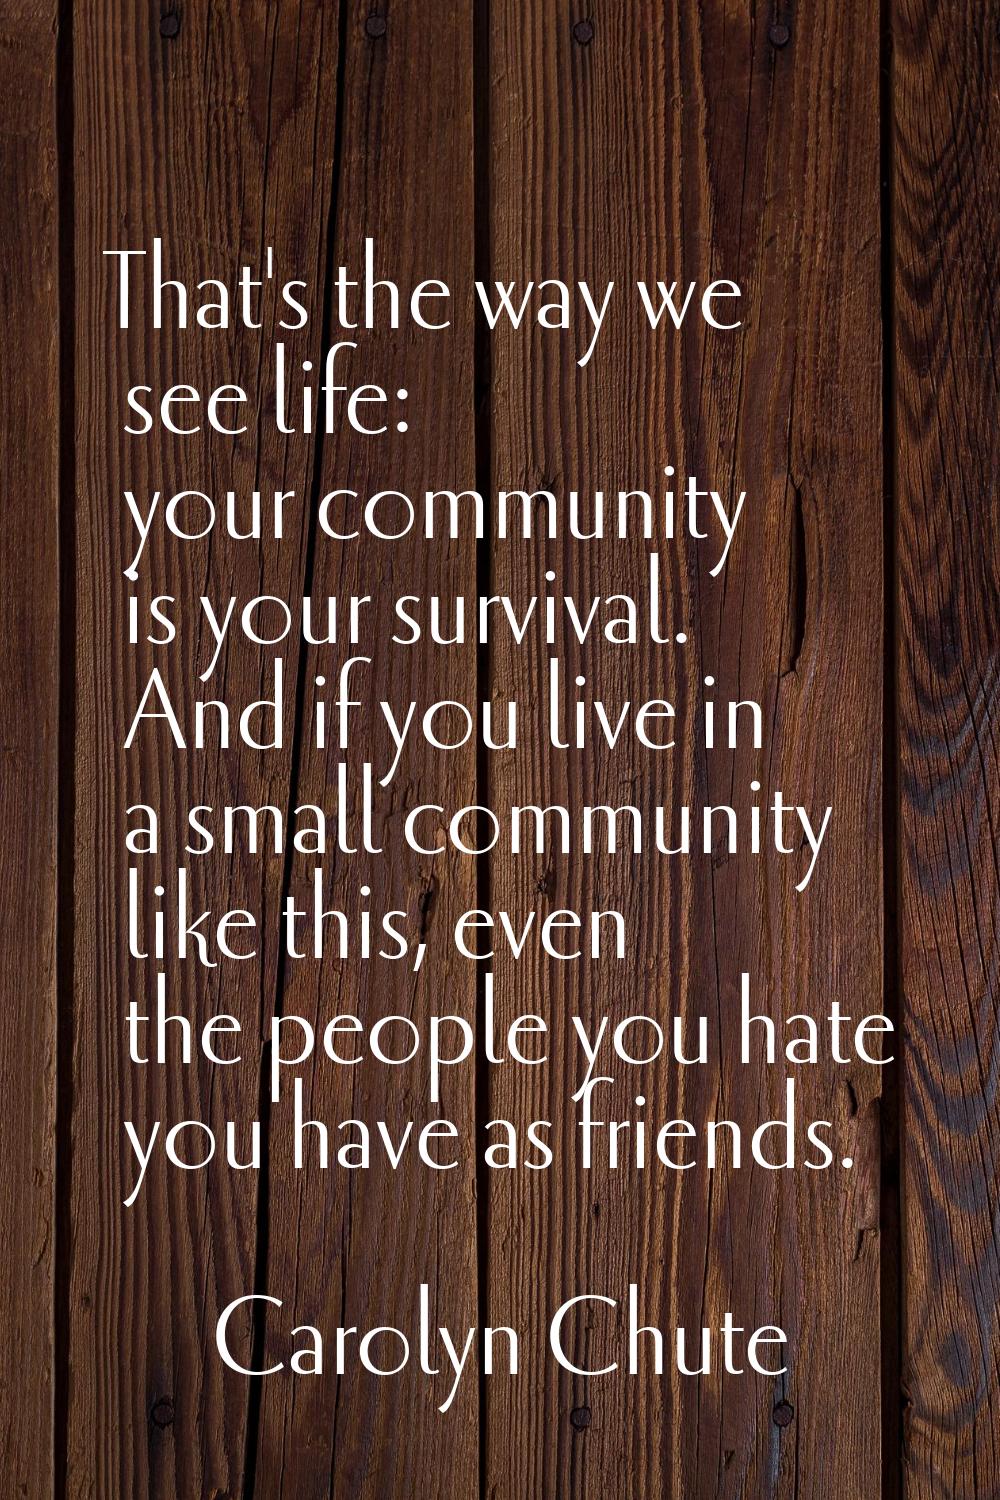 That's the way we see life: your community is your survival. And if you live in a small community l